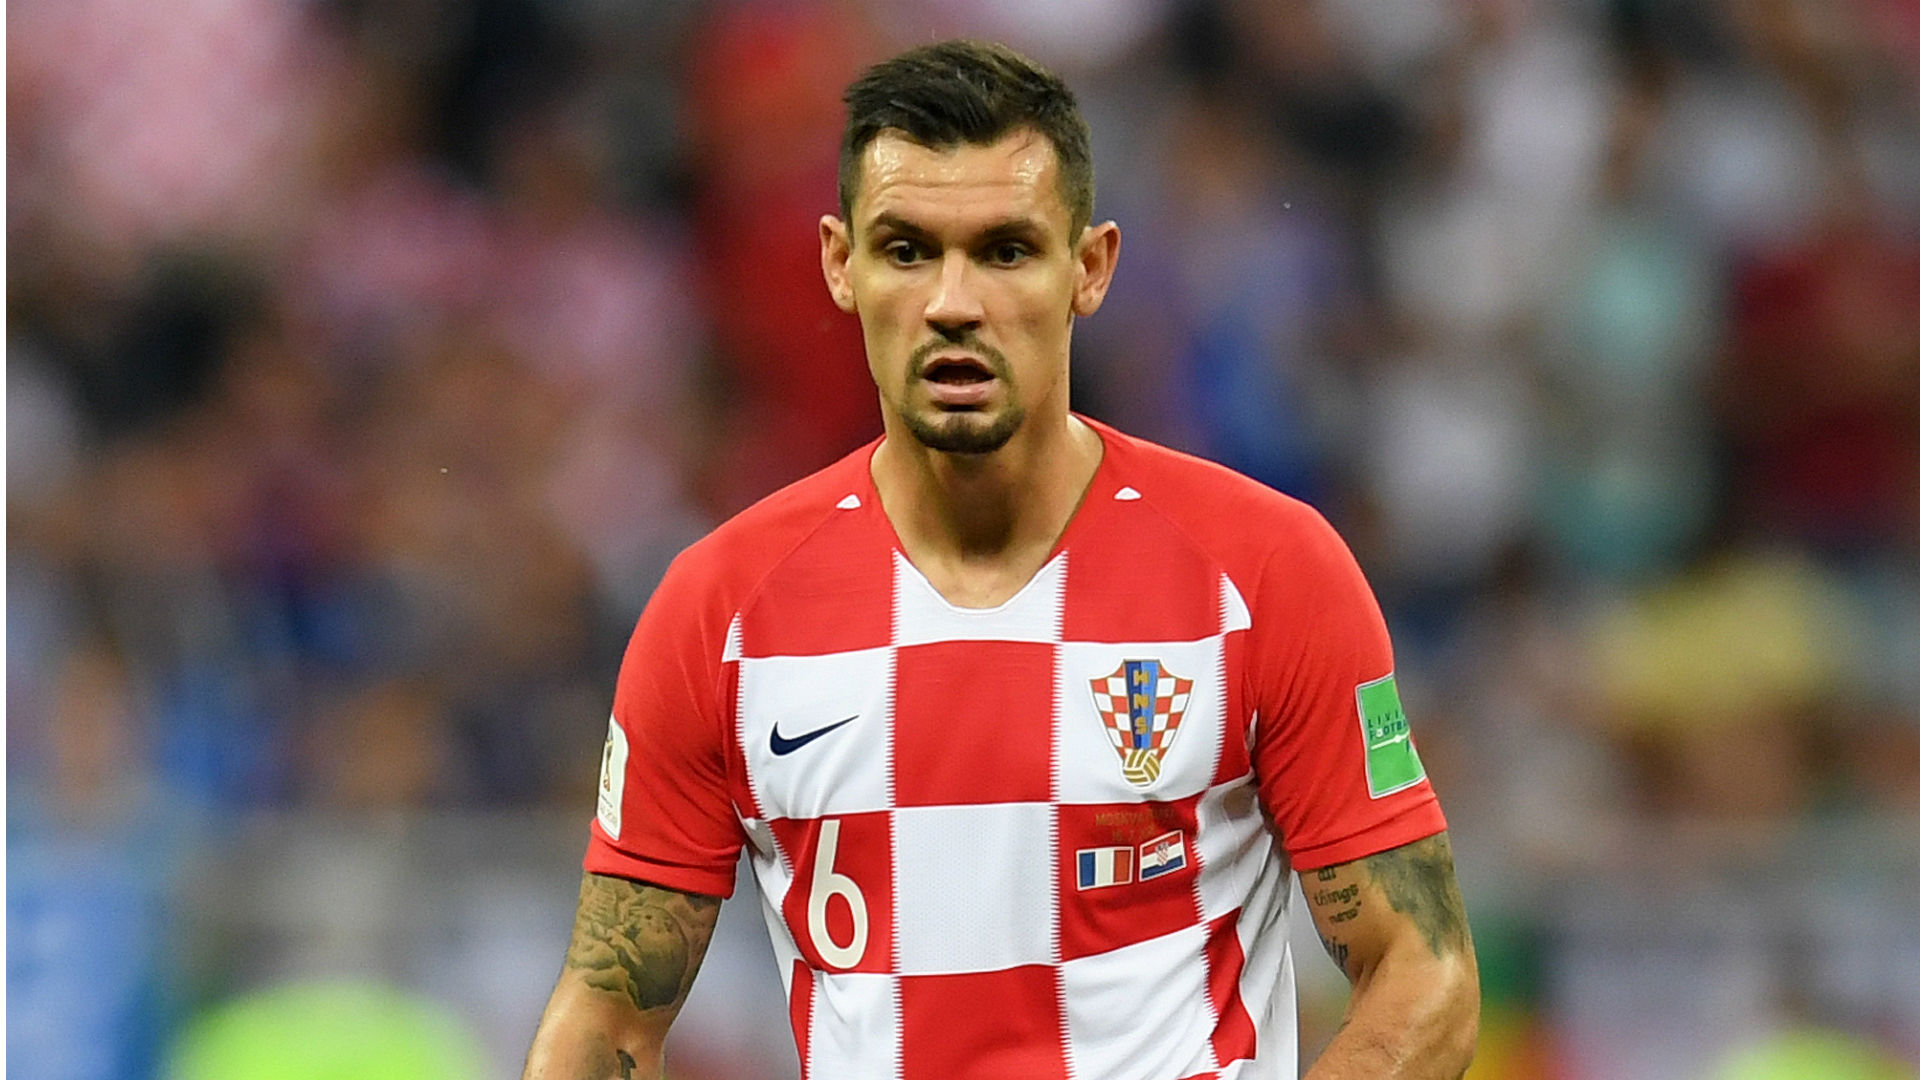 Croatia defender Dejan Lovren has been sanctioned by UEFA for criticising Spain ahead of their Nations League clash.